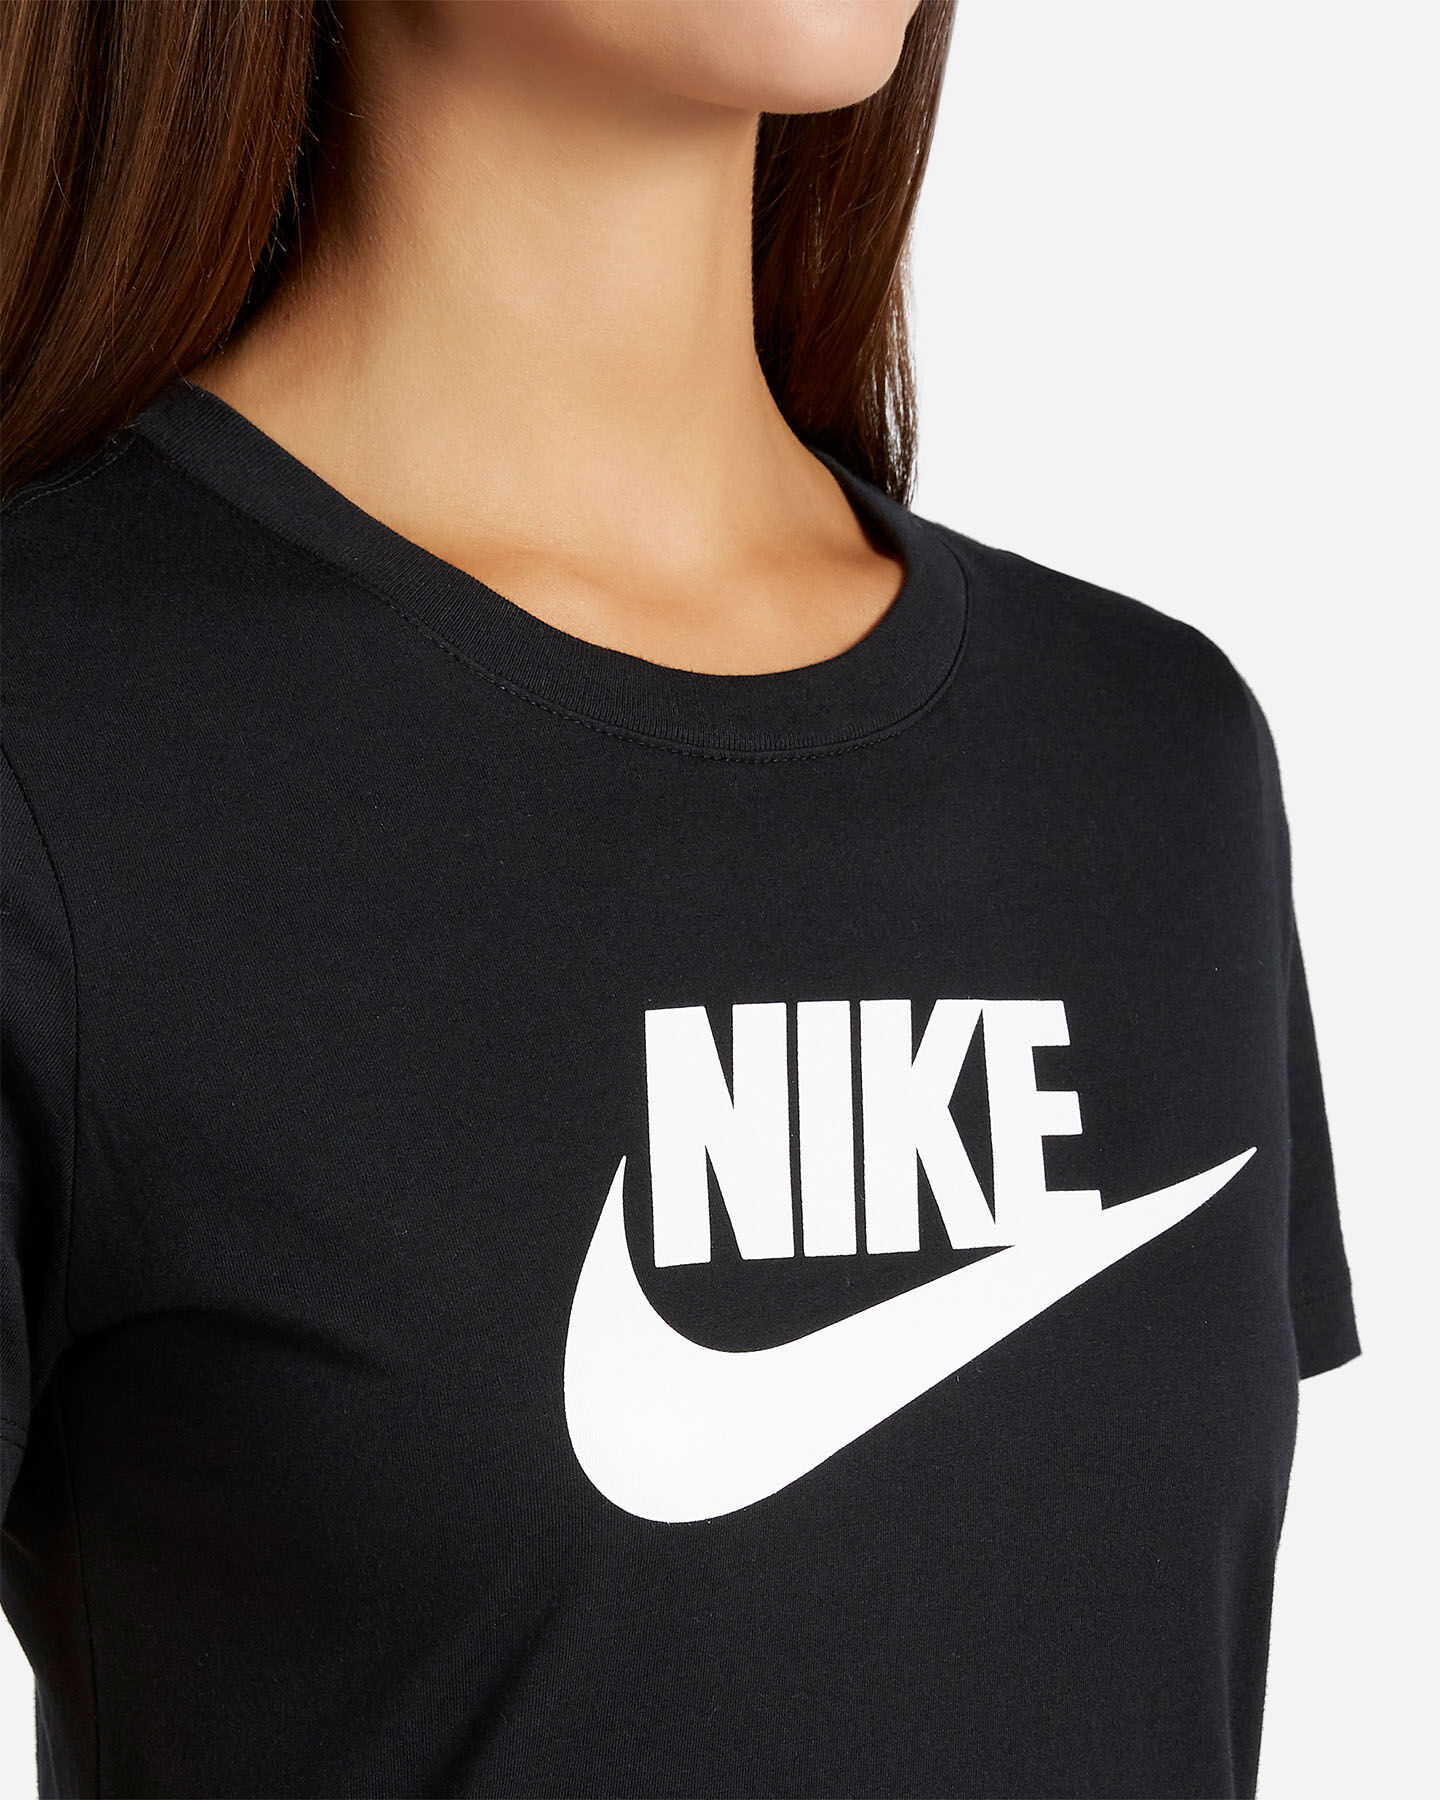  T-Shirt NIKE JERSEY BLOGO W S2015204 scatto 4